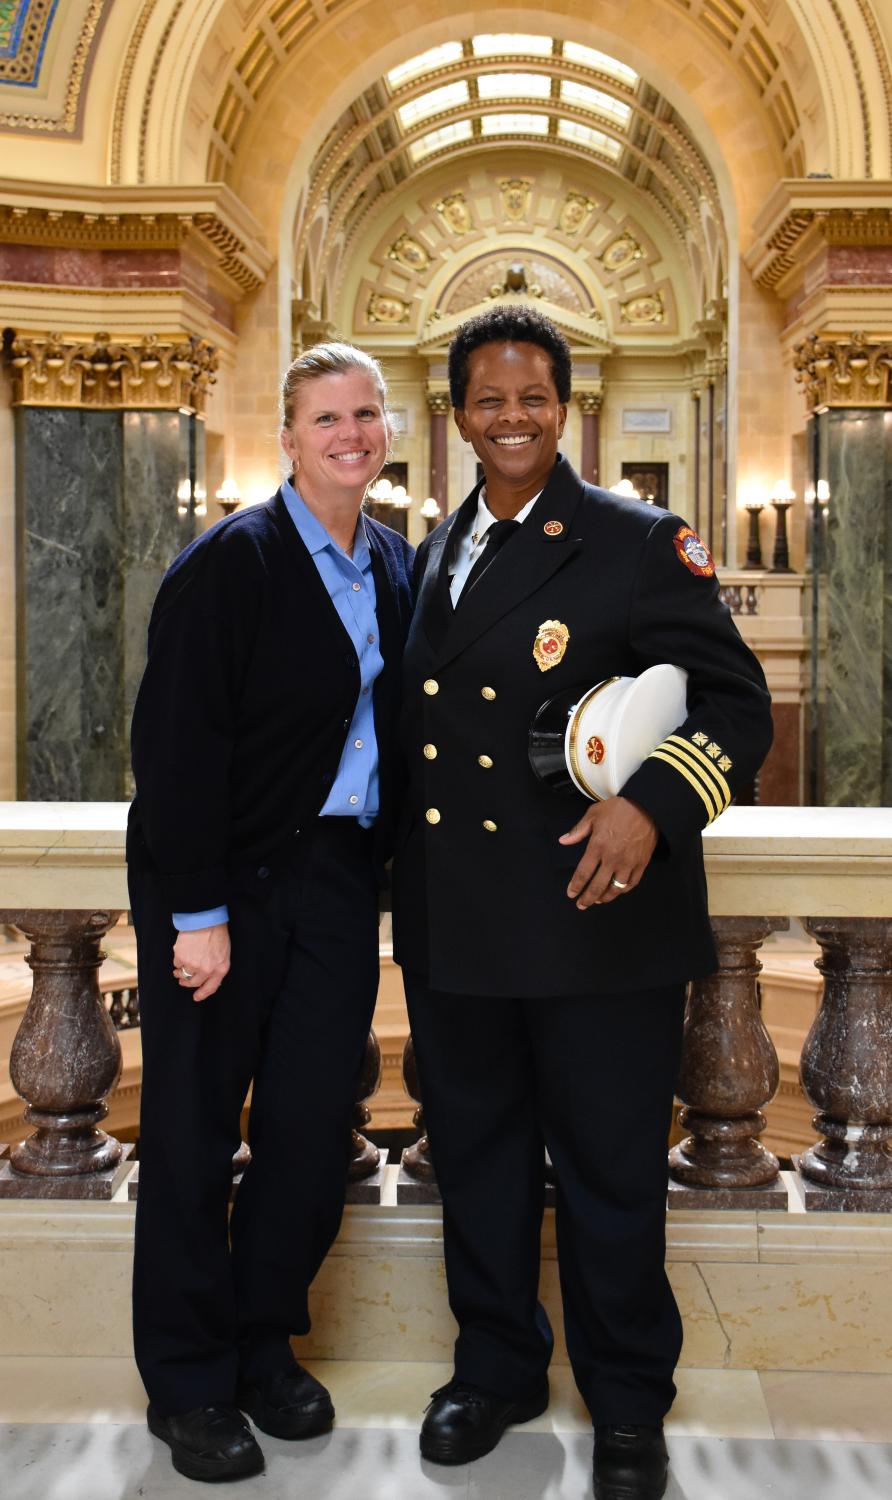 Division Chief Burrus and her wife